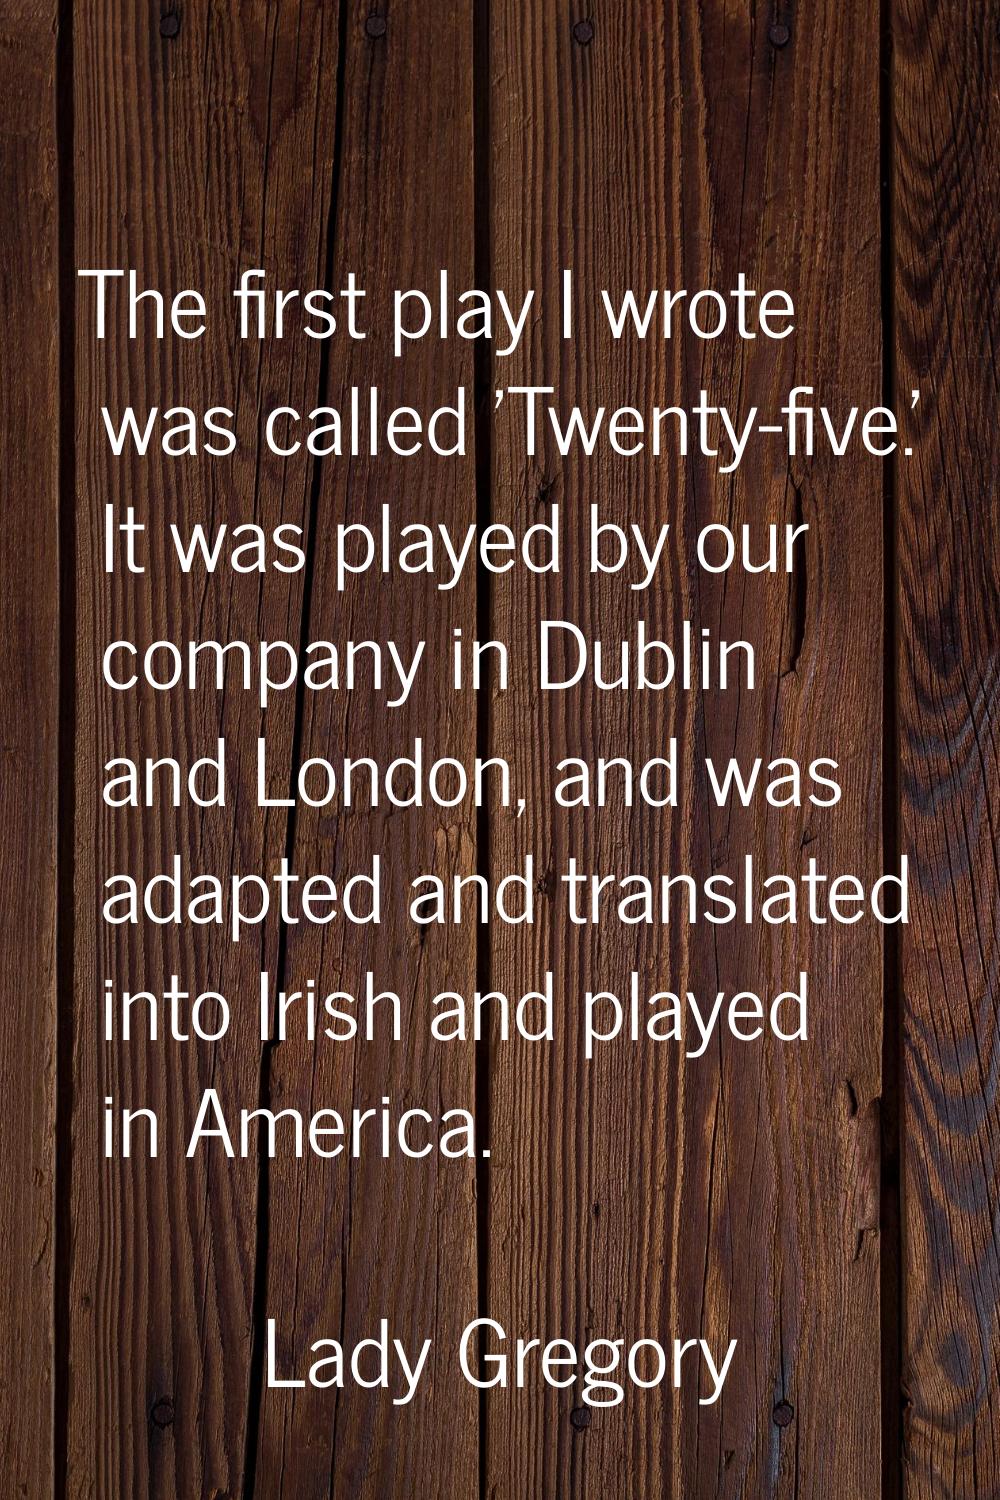 The first play I wrote was called 'Twenty-five.' It was played by our company in Dublin and London,